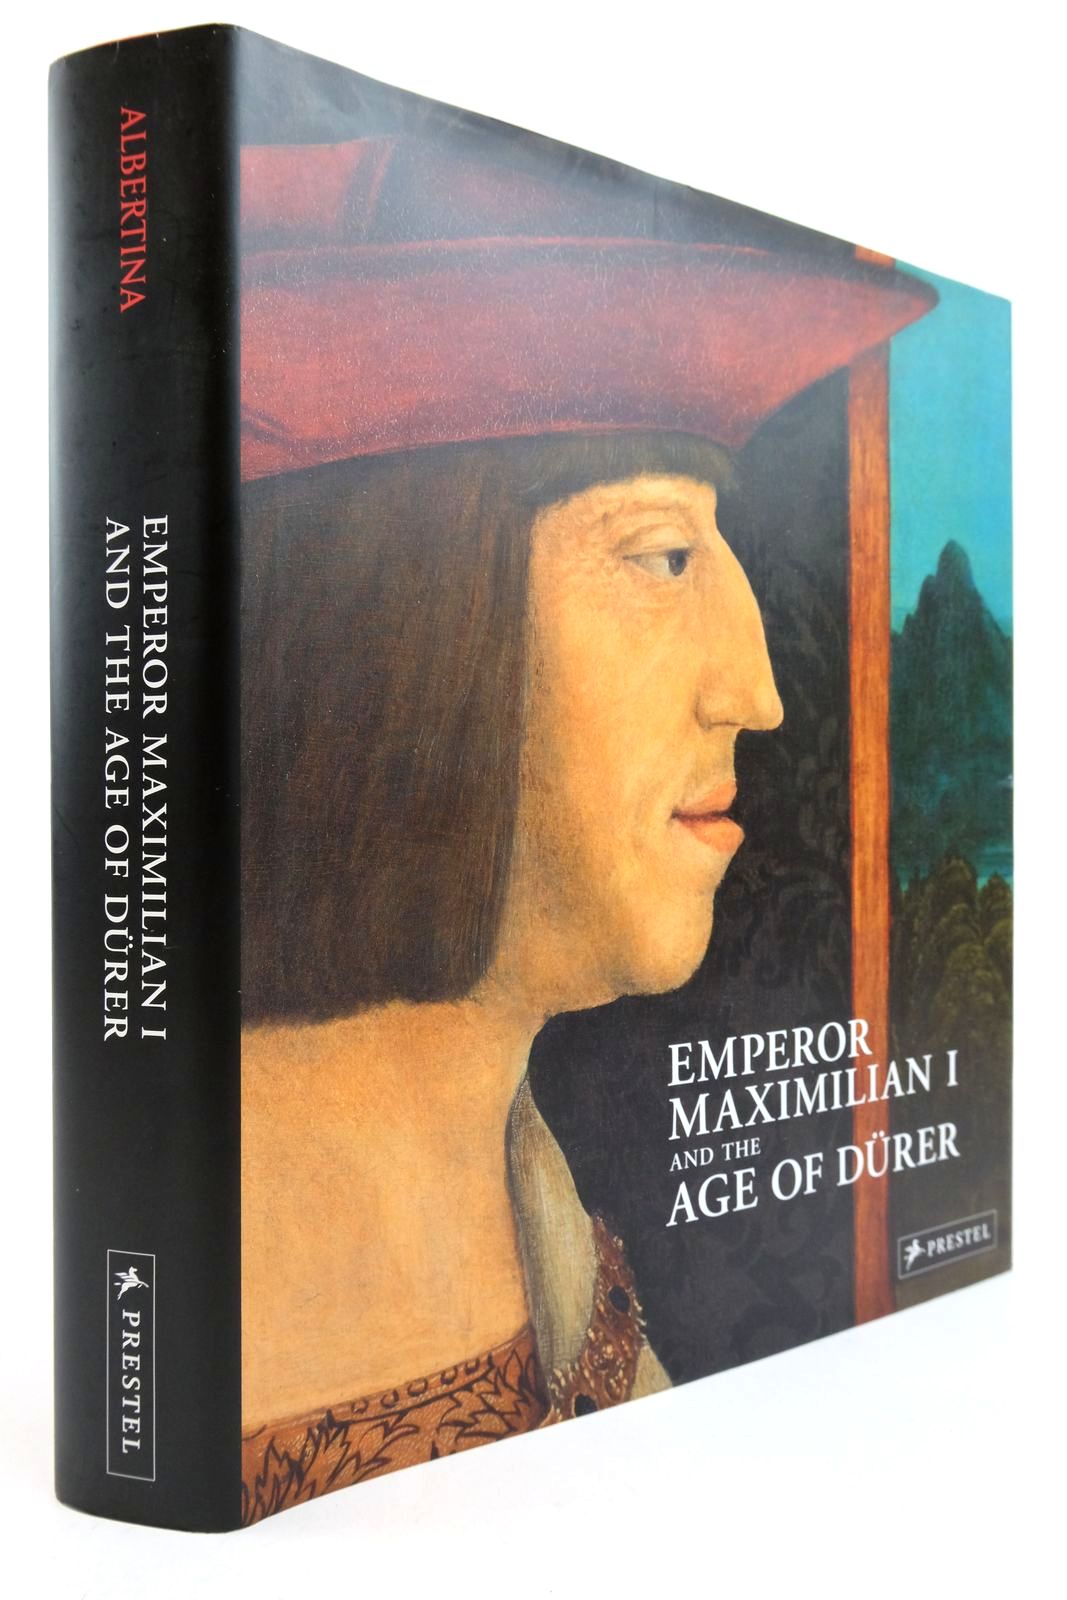 Photo of EMPEROR MAXIMILIAN I AND THE AGE OF DURER- Stock Number: 2139074